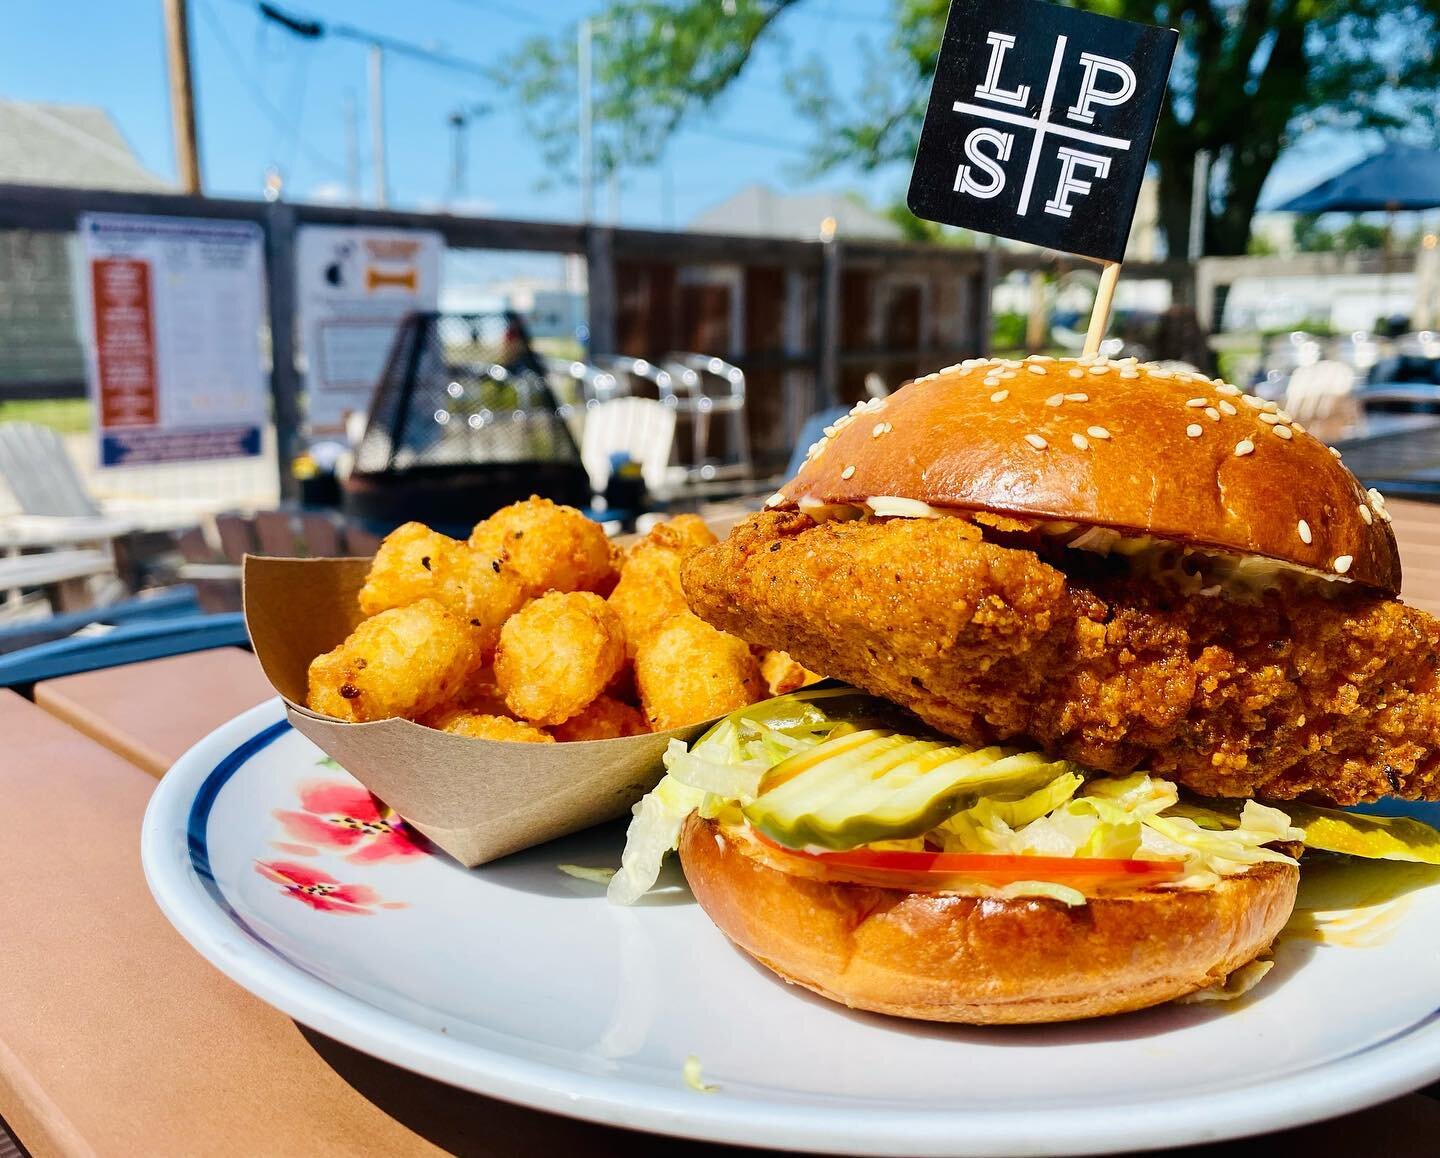 It&rsquo;s a beautiful day for a fried chicken sandwich 🤤🐓
Only available Mondays at LPSF 

#friedchicken #mondayspecial #welovefood